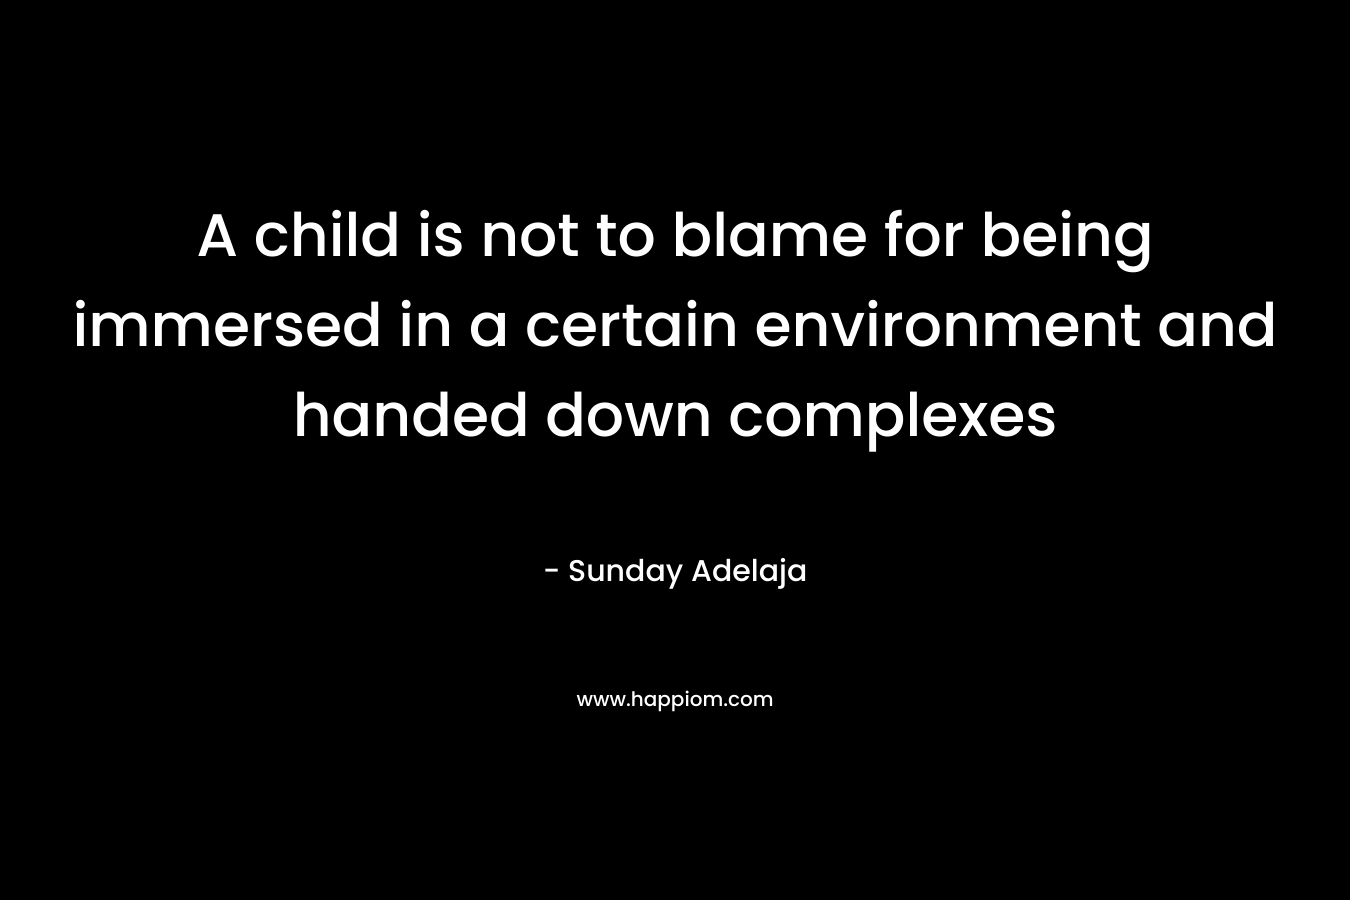 A child is not to blame for being immersed in a certain environment and handed down complexes – Sunday Adelaja